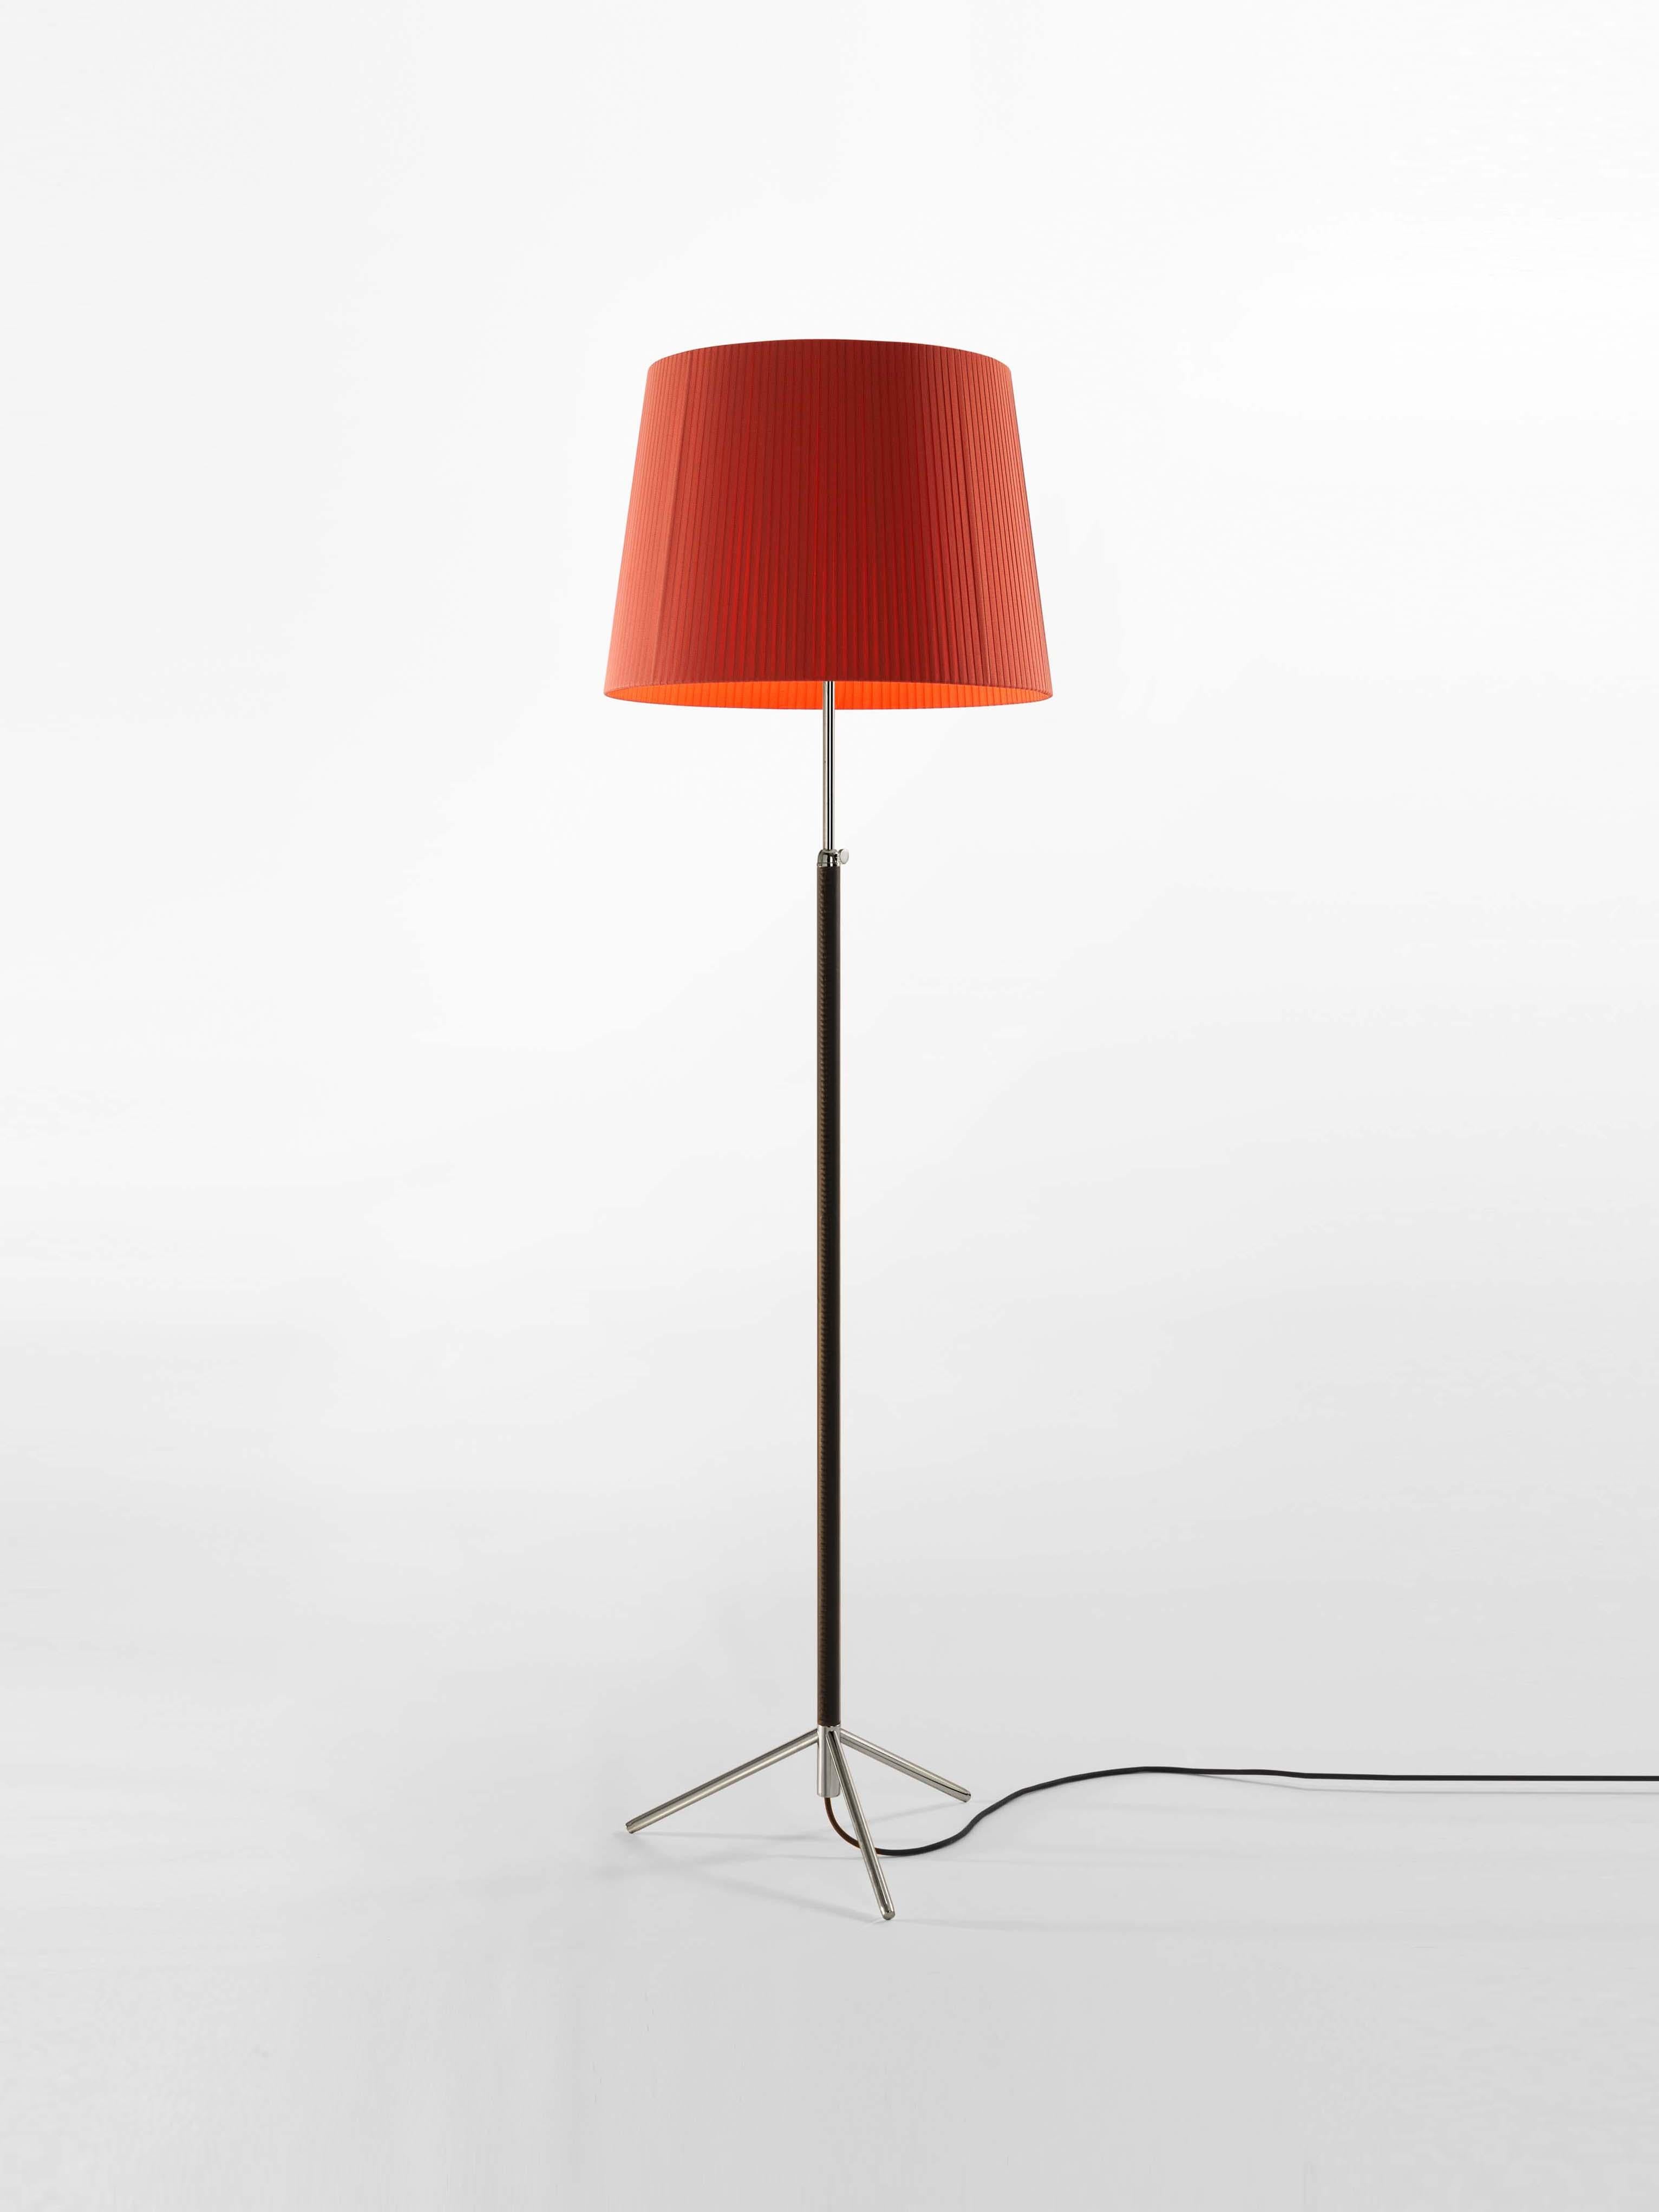 Red and Chrome Pie de Salón G1 floor lamp by Jaume Sans
Dimensions: D 45 x H 120-160 cm
Materials: Metal, leather, ribbon.
Available in chrome-plated or polished brass structure.
Available in other shade colors and sizes.

This slender